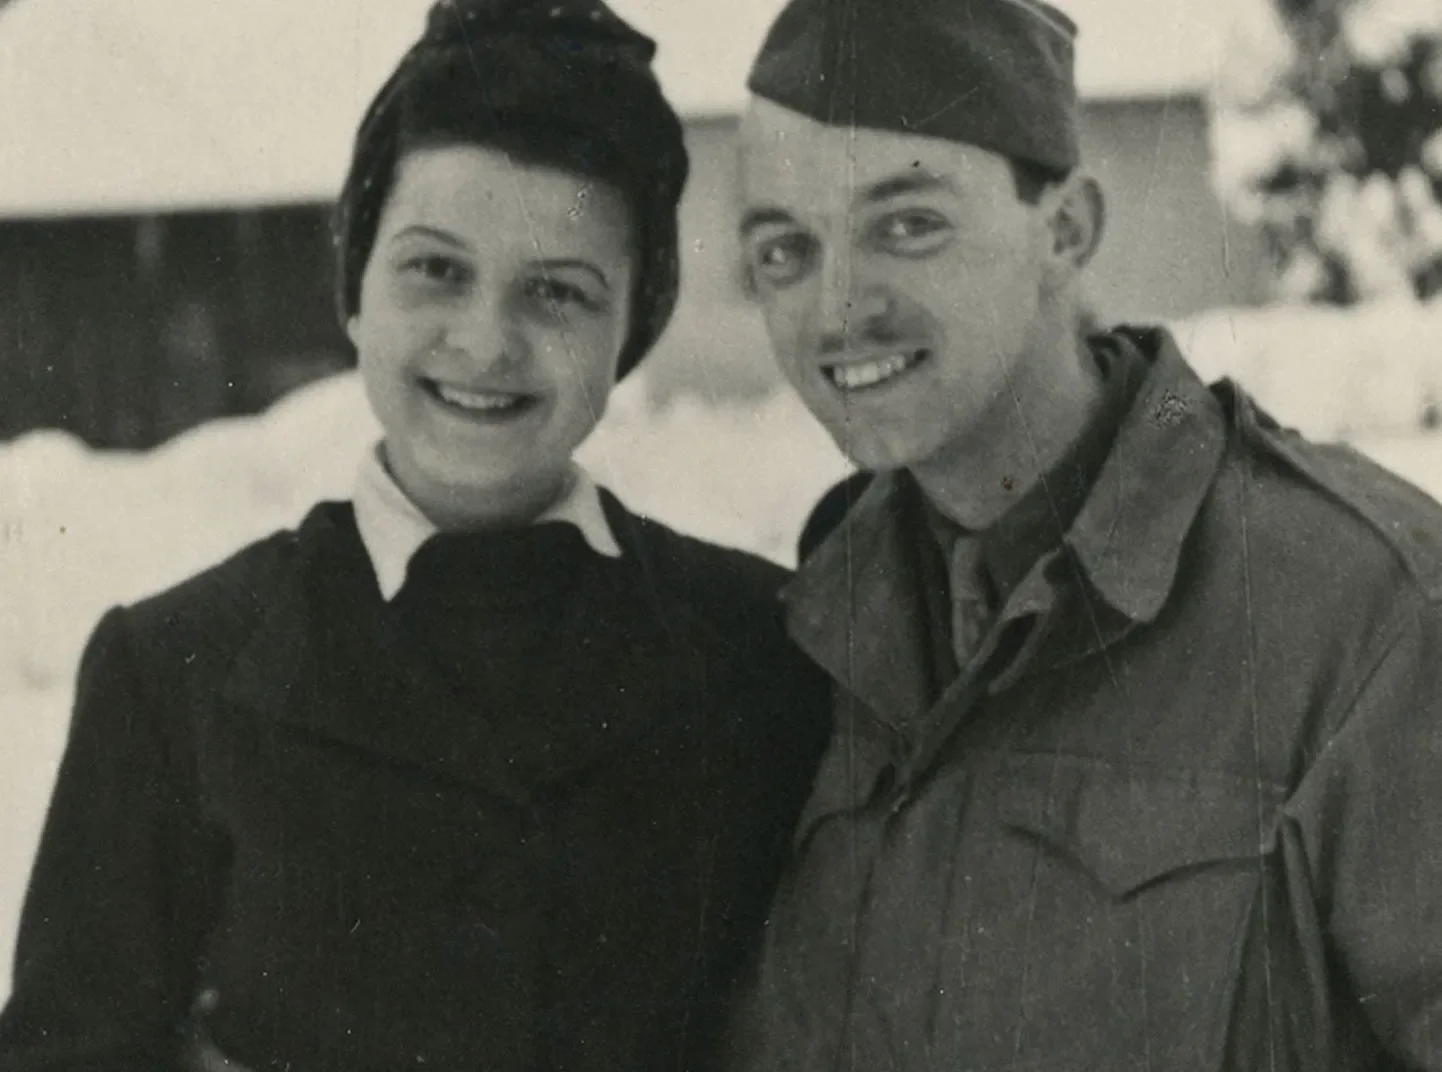 An old black and white image of a man and woman smiling and standing in the snow.